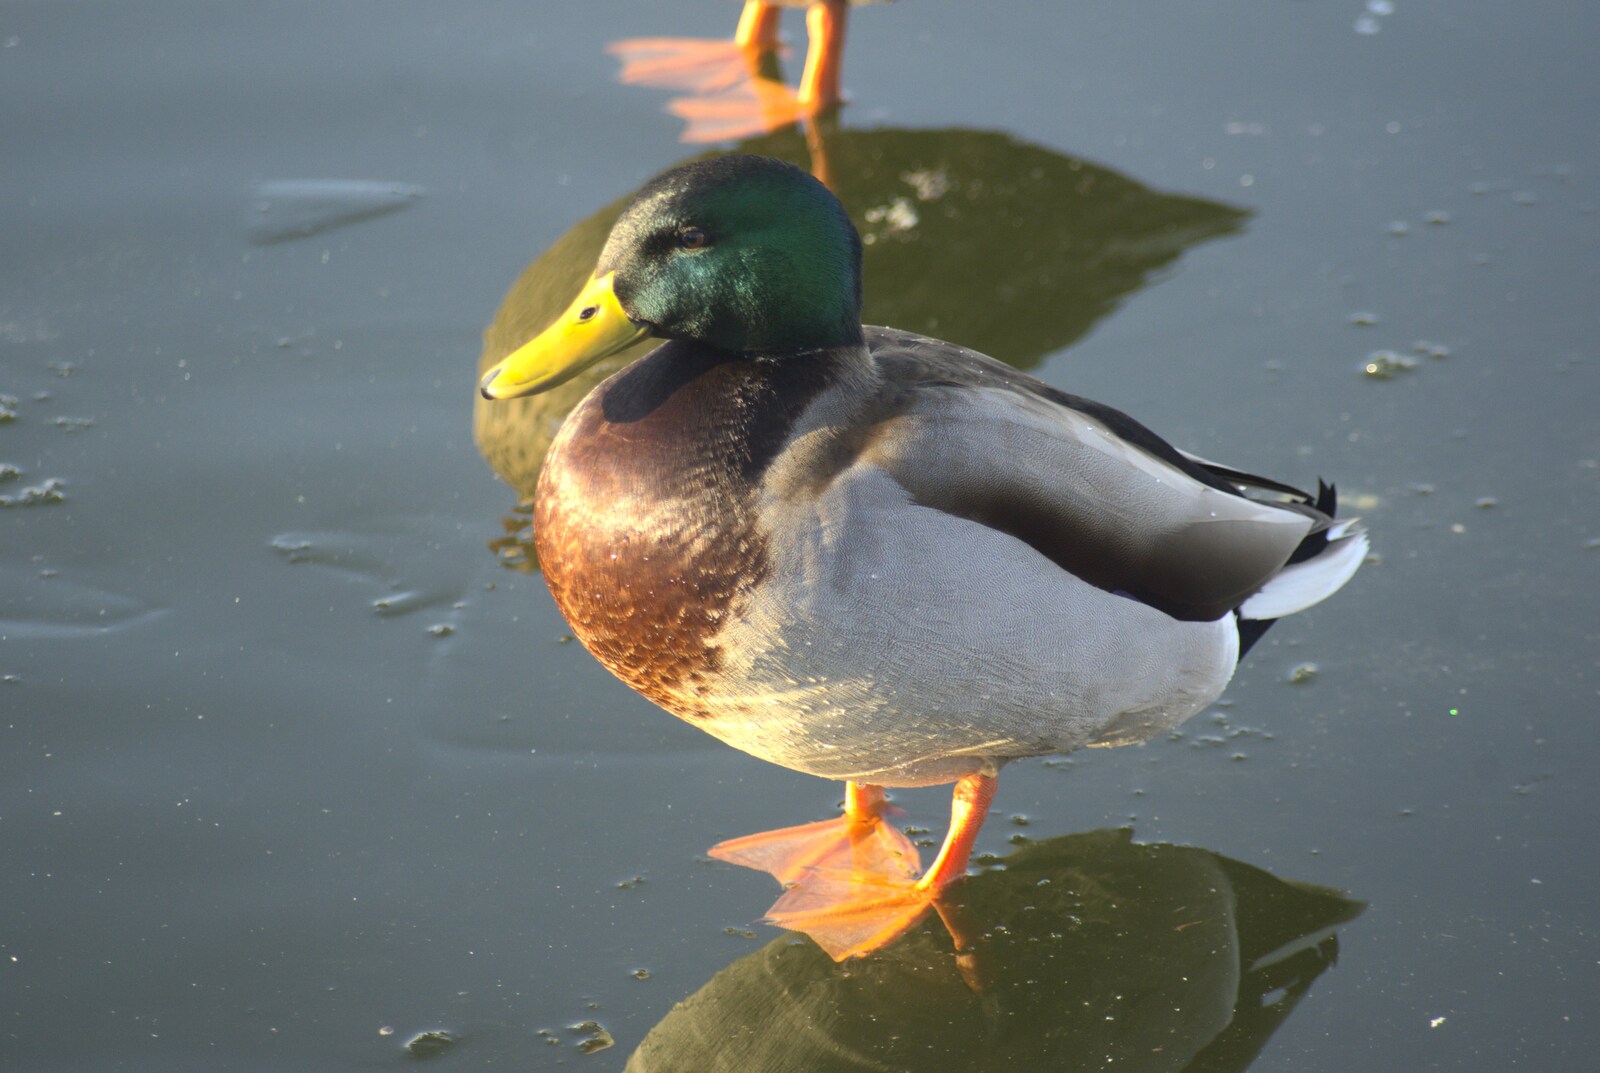 A Snowy Miscellany, Diss, Norfolk - 9th January 2010: Another duck looks like it's floating on water